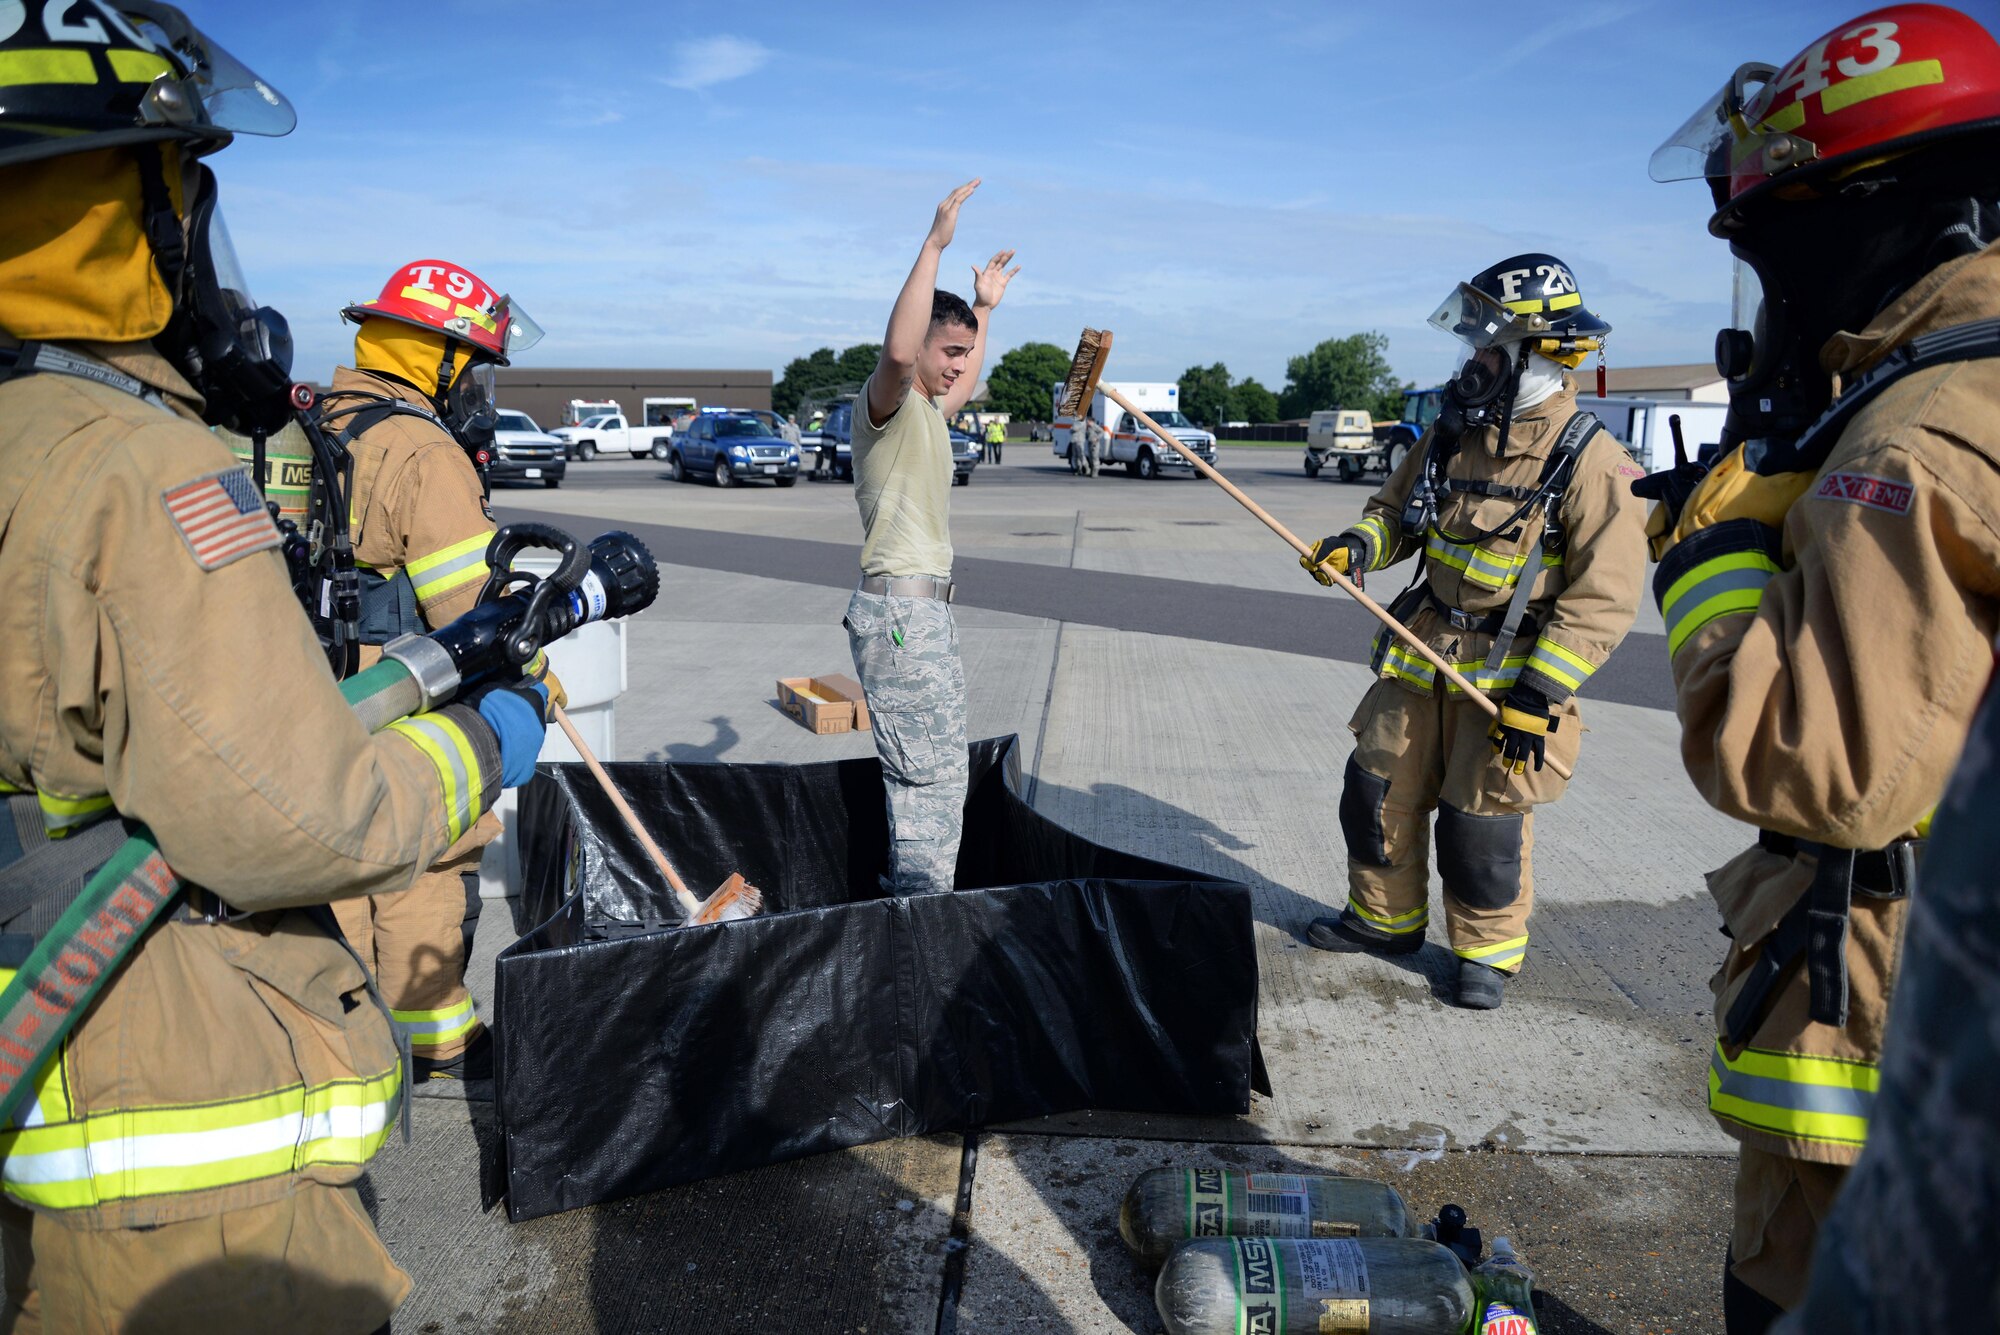 U.S. Air Force Airmen from the 100th Civil Engineer Squadron Fire Department conduct a simulated decontamination during an exercise July 15, 2016, on RAF Mildenhall, England. The exercise tested Team Mildenhall first responders during a simulated fuel spill.  (U.S. Air Force photo by Senior Airman Christine Halan)